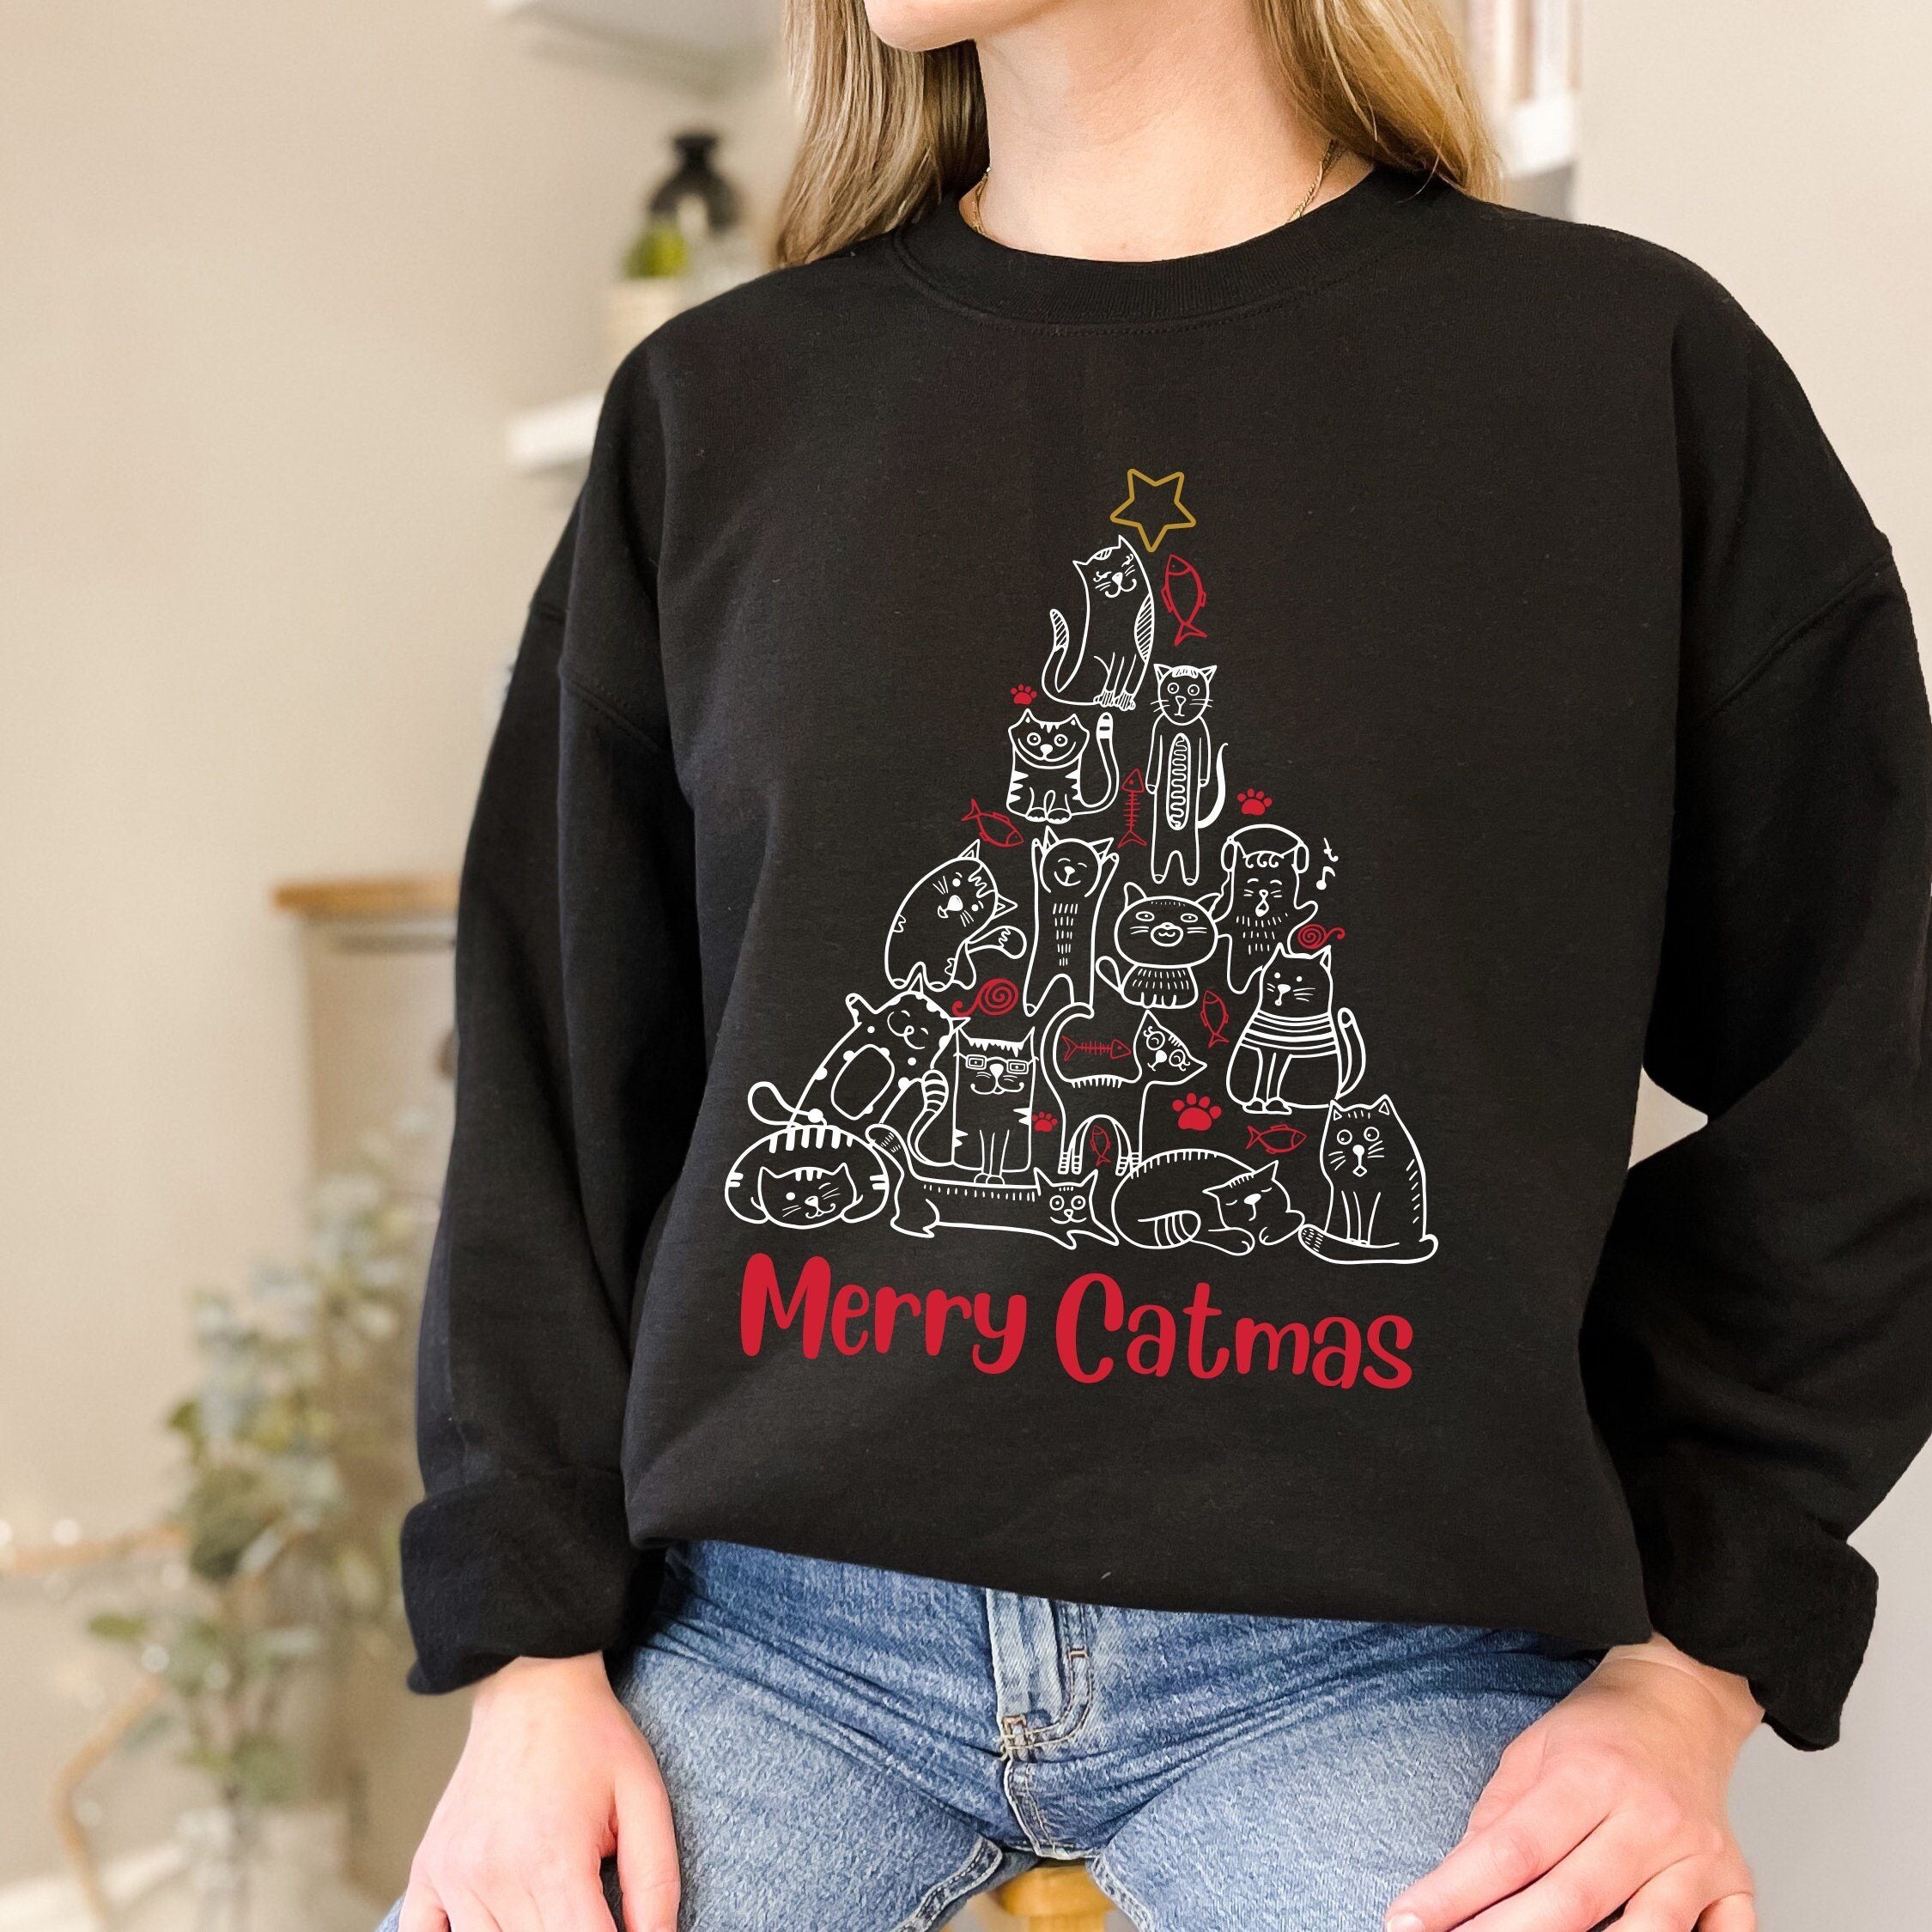 Merry Catmas Christmas tree jumper, Unisex Adult & Kids sizes, Cat owner gift